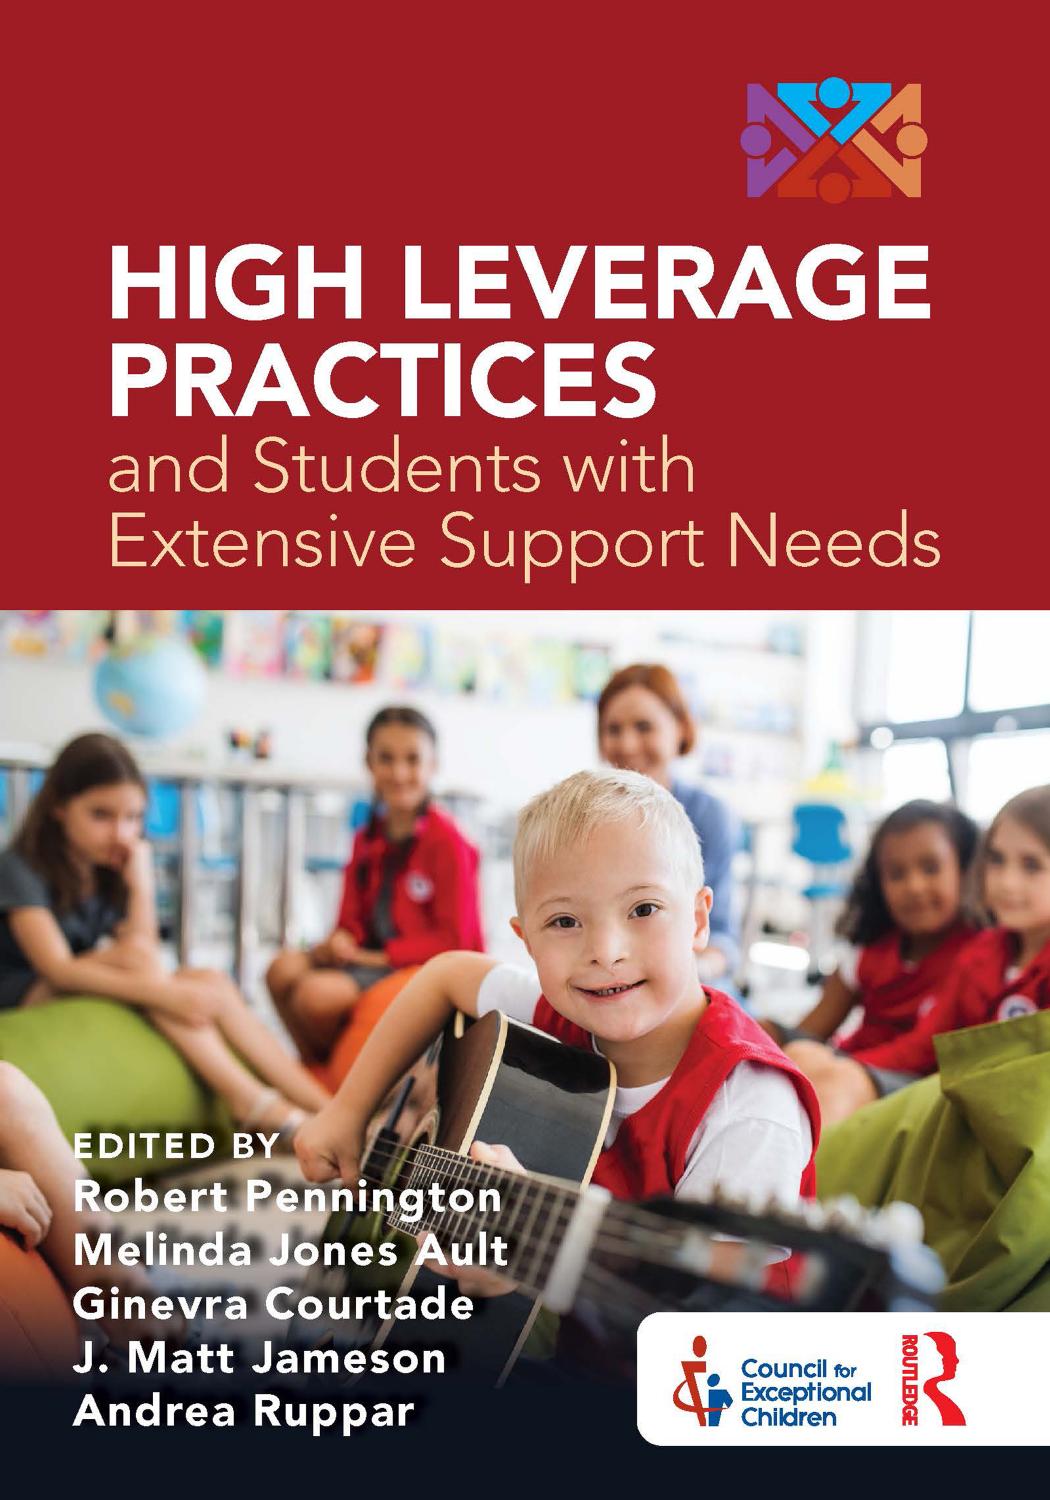 High Leverage Practices and Students with Extensive Support Needs by Robert Pennington Melinda Jones Ault Ginevra Courtade J. Matt Jameson Andrea Ruppar